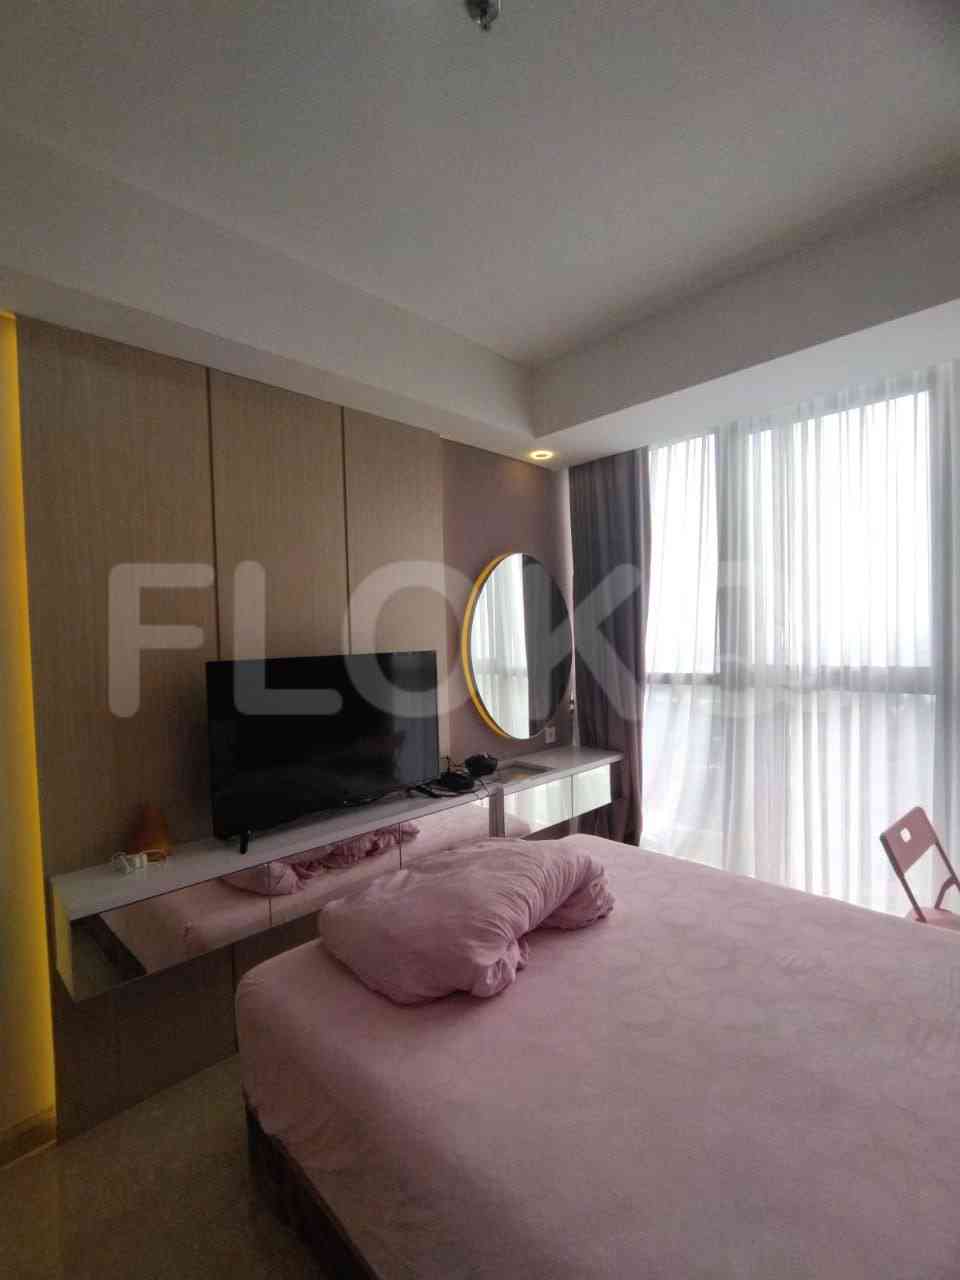 3 Bedroom on 25th Floor for Rent in Gold Coast Apartment - fka8f3 2